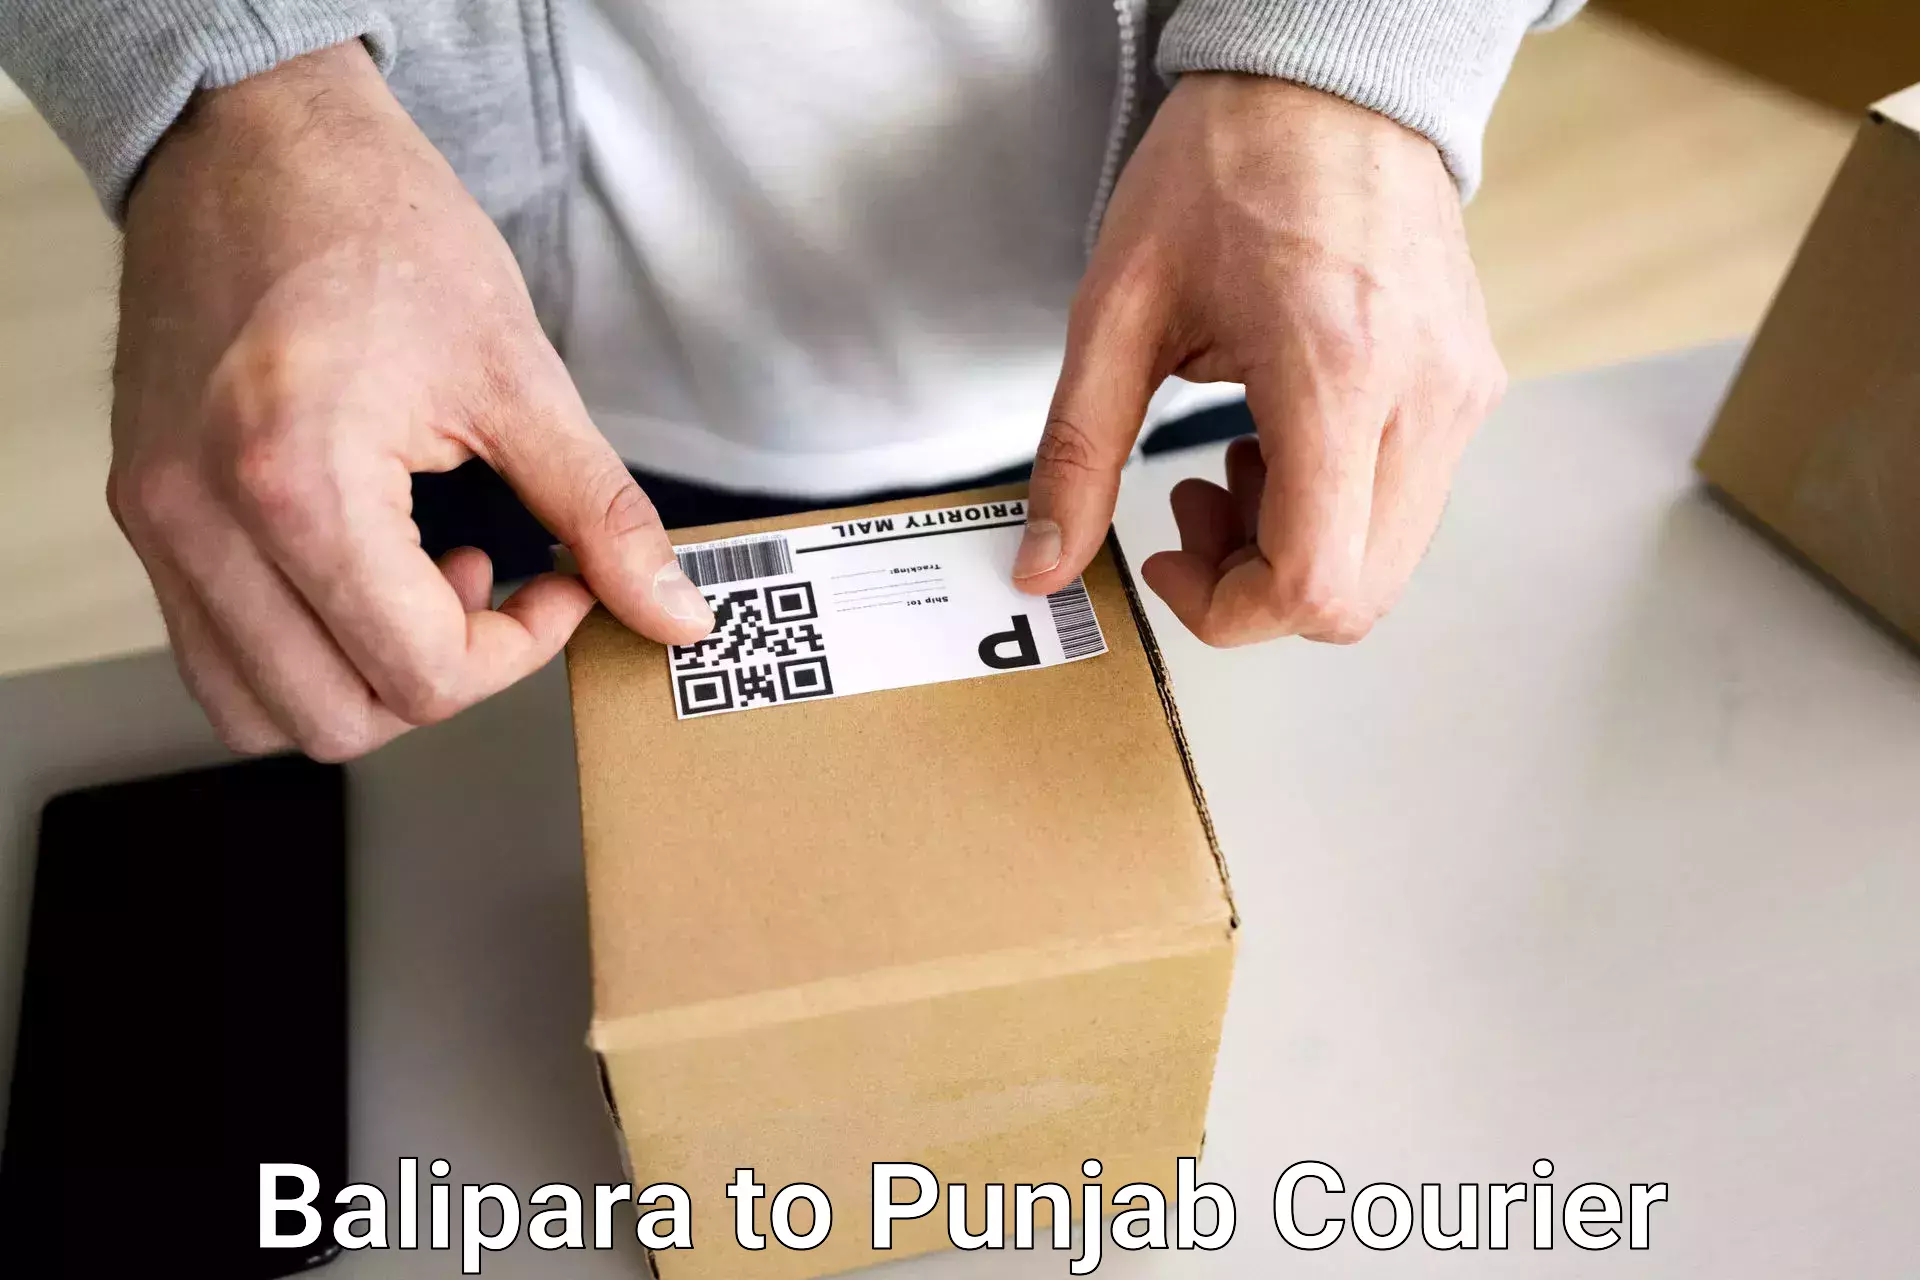 Luggage delivery system Balipara to Mohali